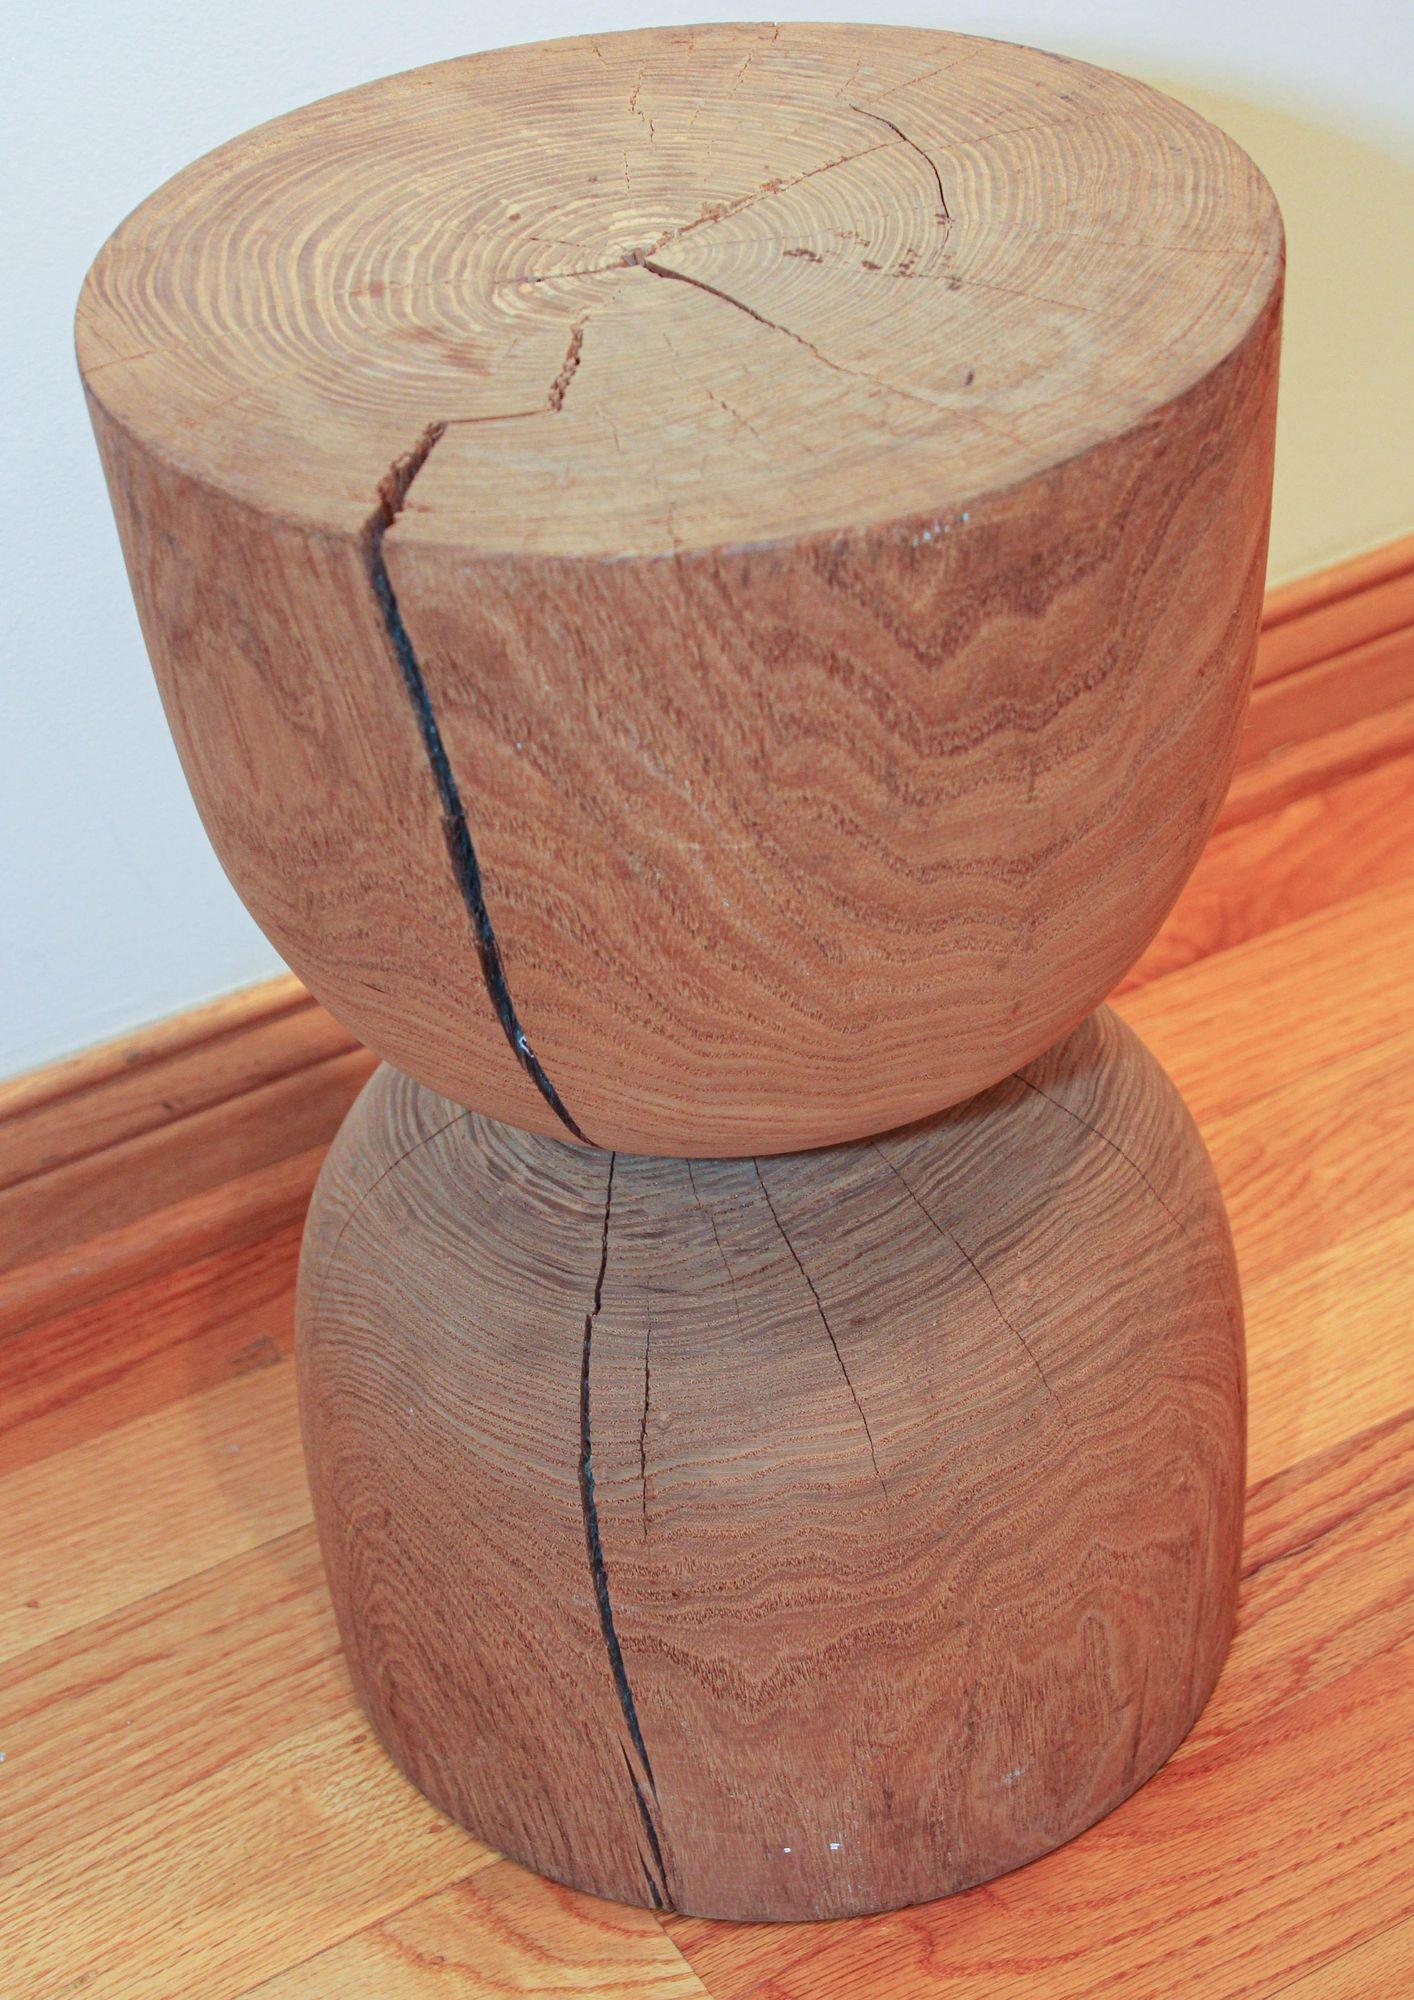 Vintage Modern minimalist sculptural wood log stool.
Simplicity of rustic design with the naturally beautiful pattern and warm neutral hues of this timeless wood log stool.
This beautiful hand made piece of wood has a distressed design, the stool